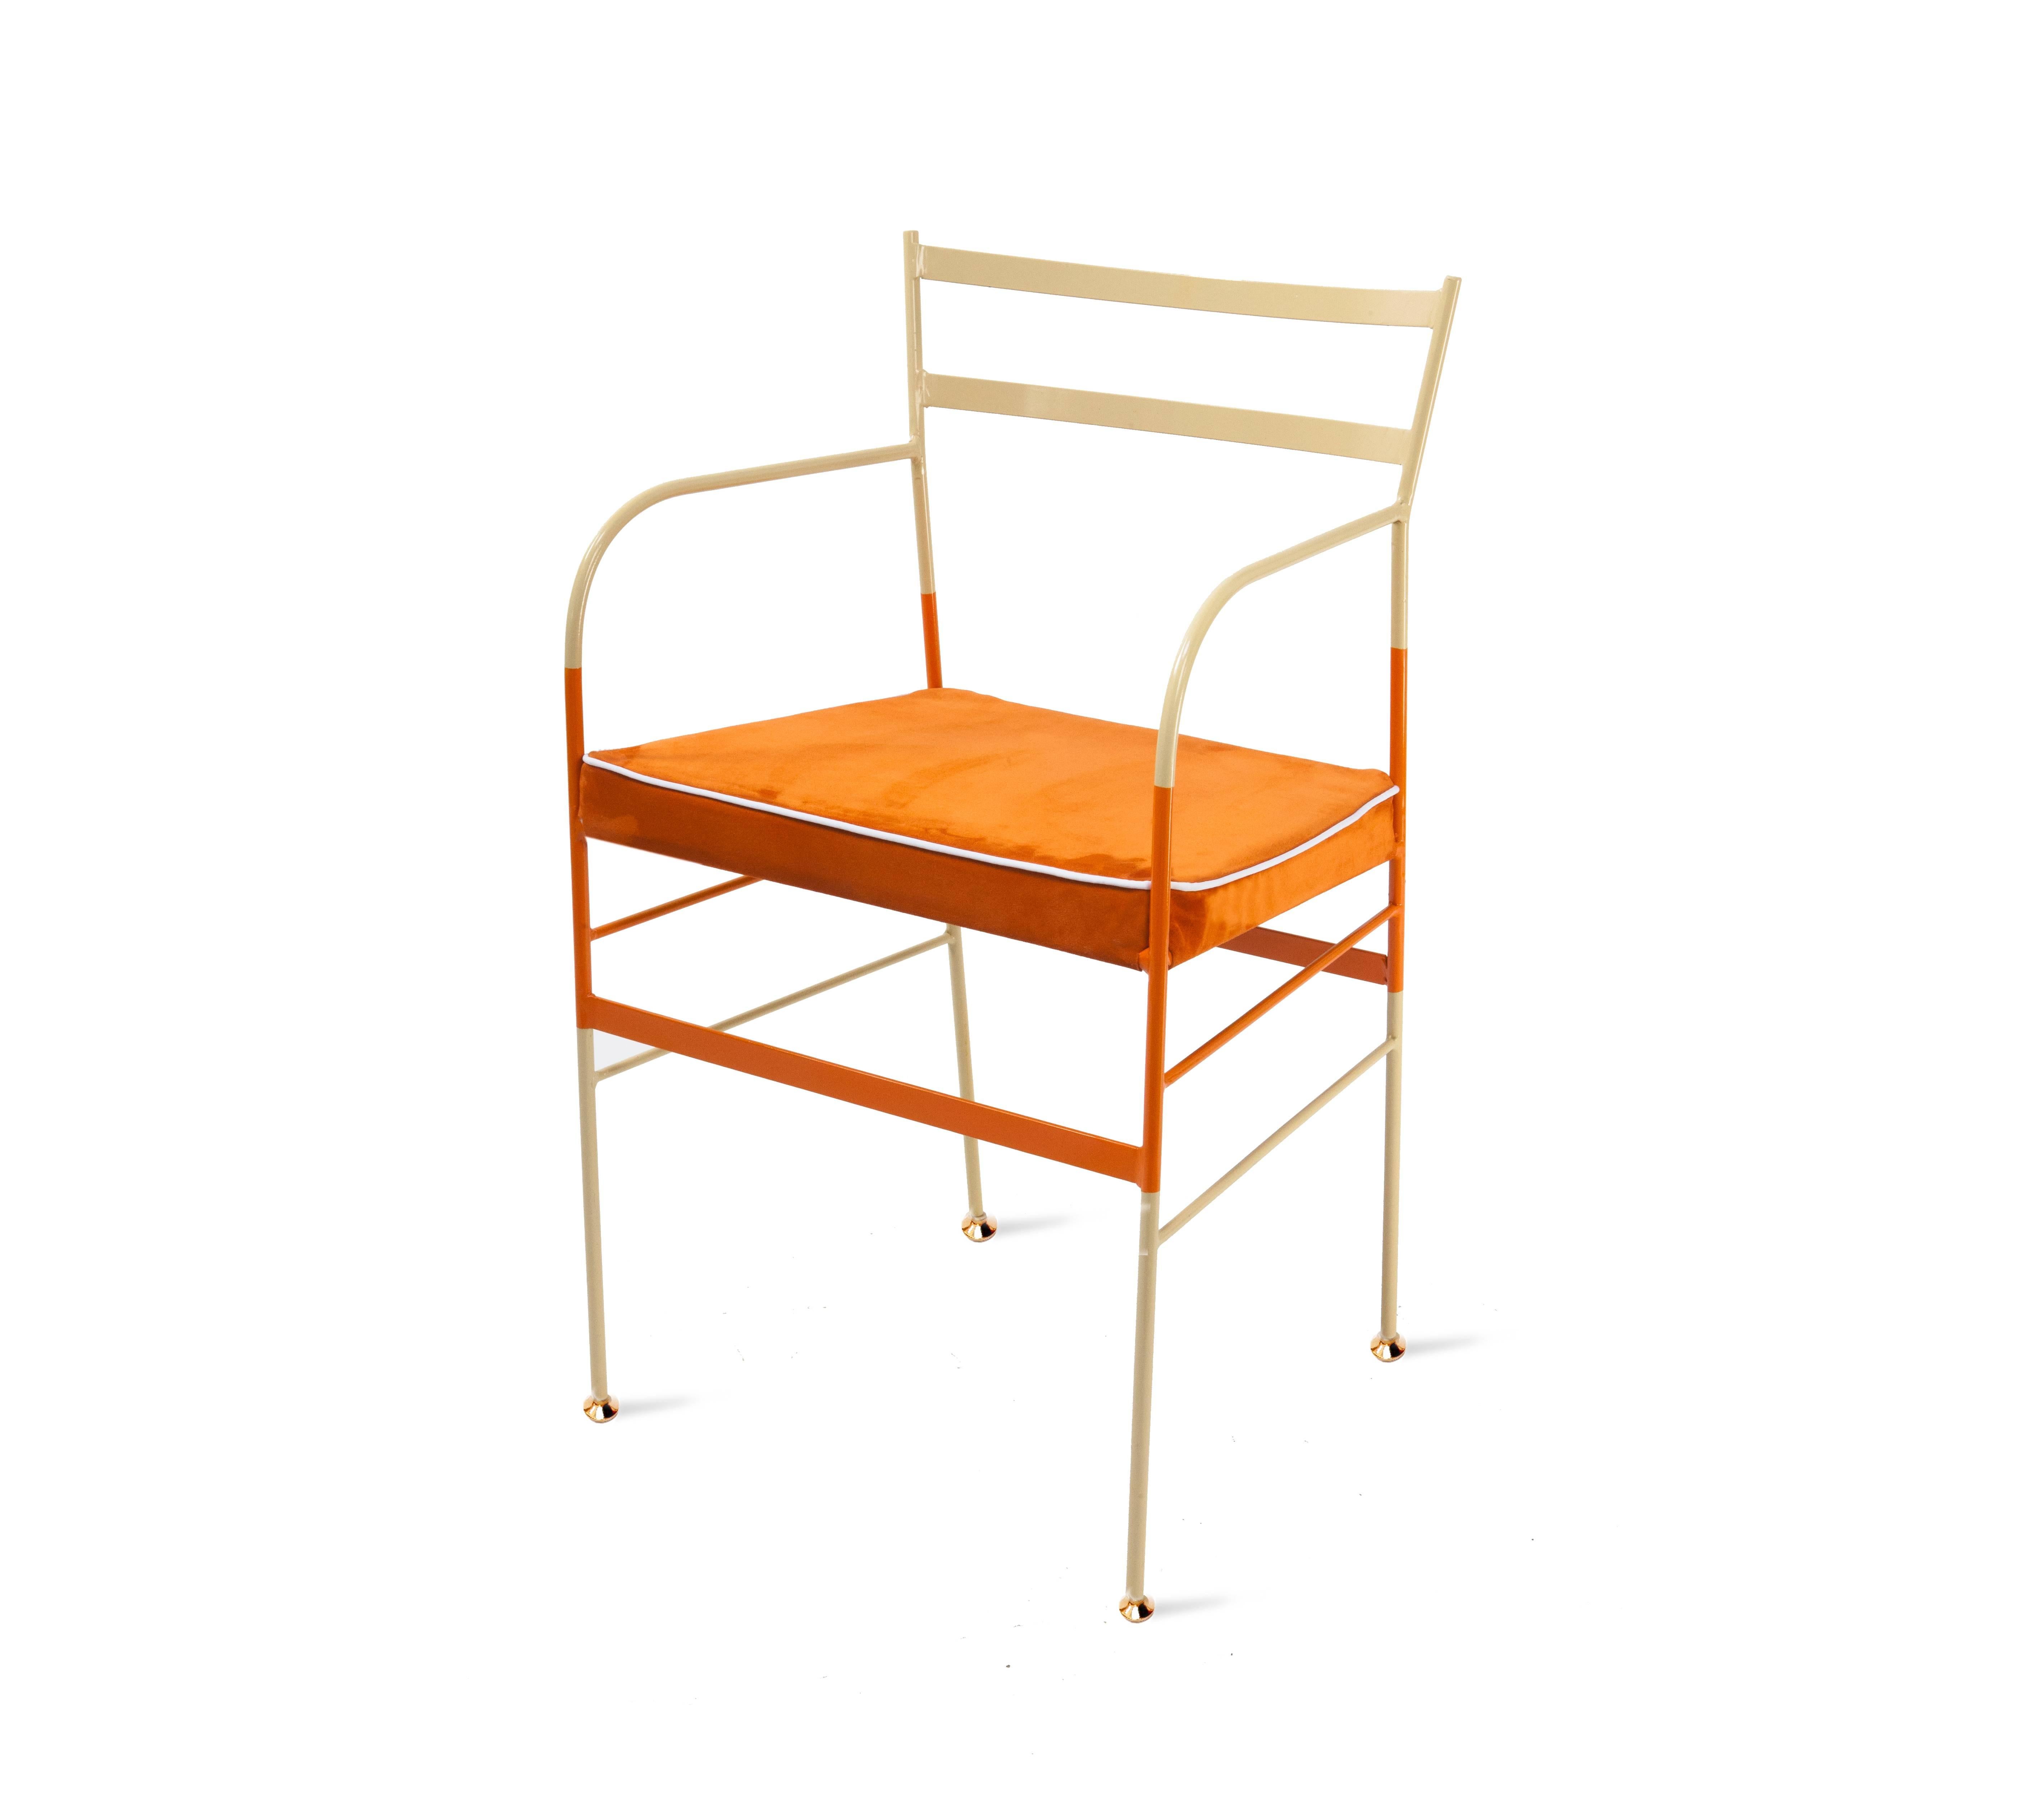 Suede piping on contrasting bright tones produces a neo-retro quality, finished with a uniquely organic compound paint and polish to prevent rust. Handcrafted in Italy from high-strength iron, these chairs by Sotow boast practicality and